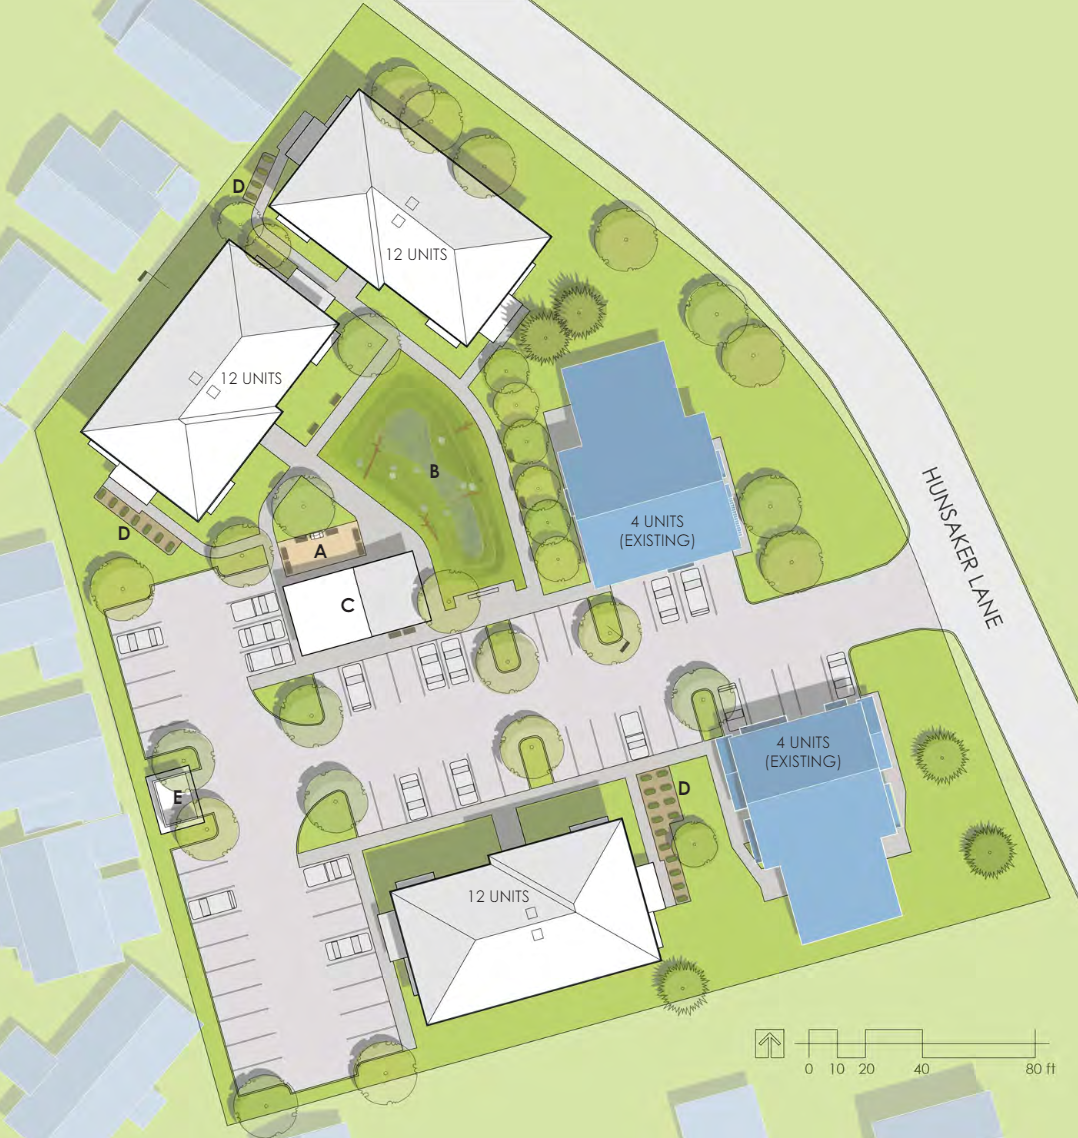 An aerial diagram shows the design concept for Cornerstone Community Housing's proposed project, The Lucy. This project intends to provide 36 newly constructed affordable rental units, totaling 75 bedrooms across one-, two- and three-bedroom units.